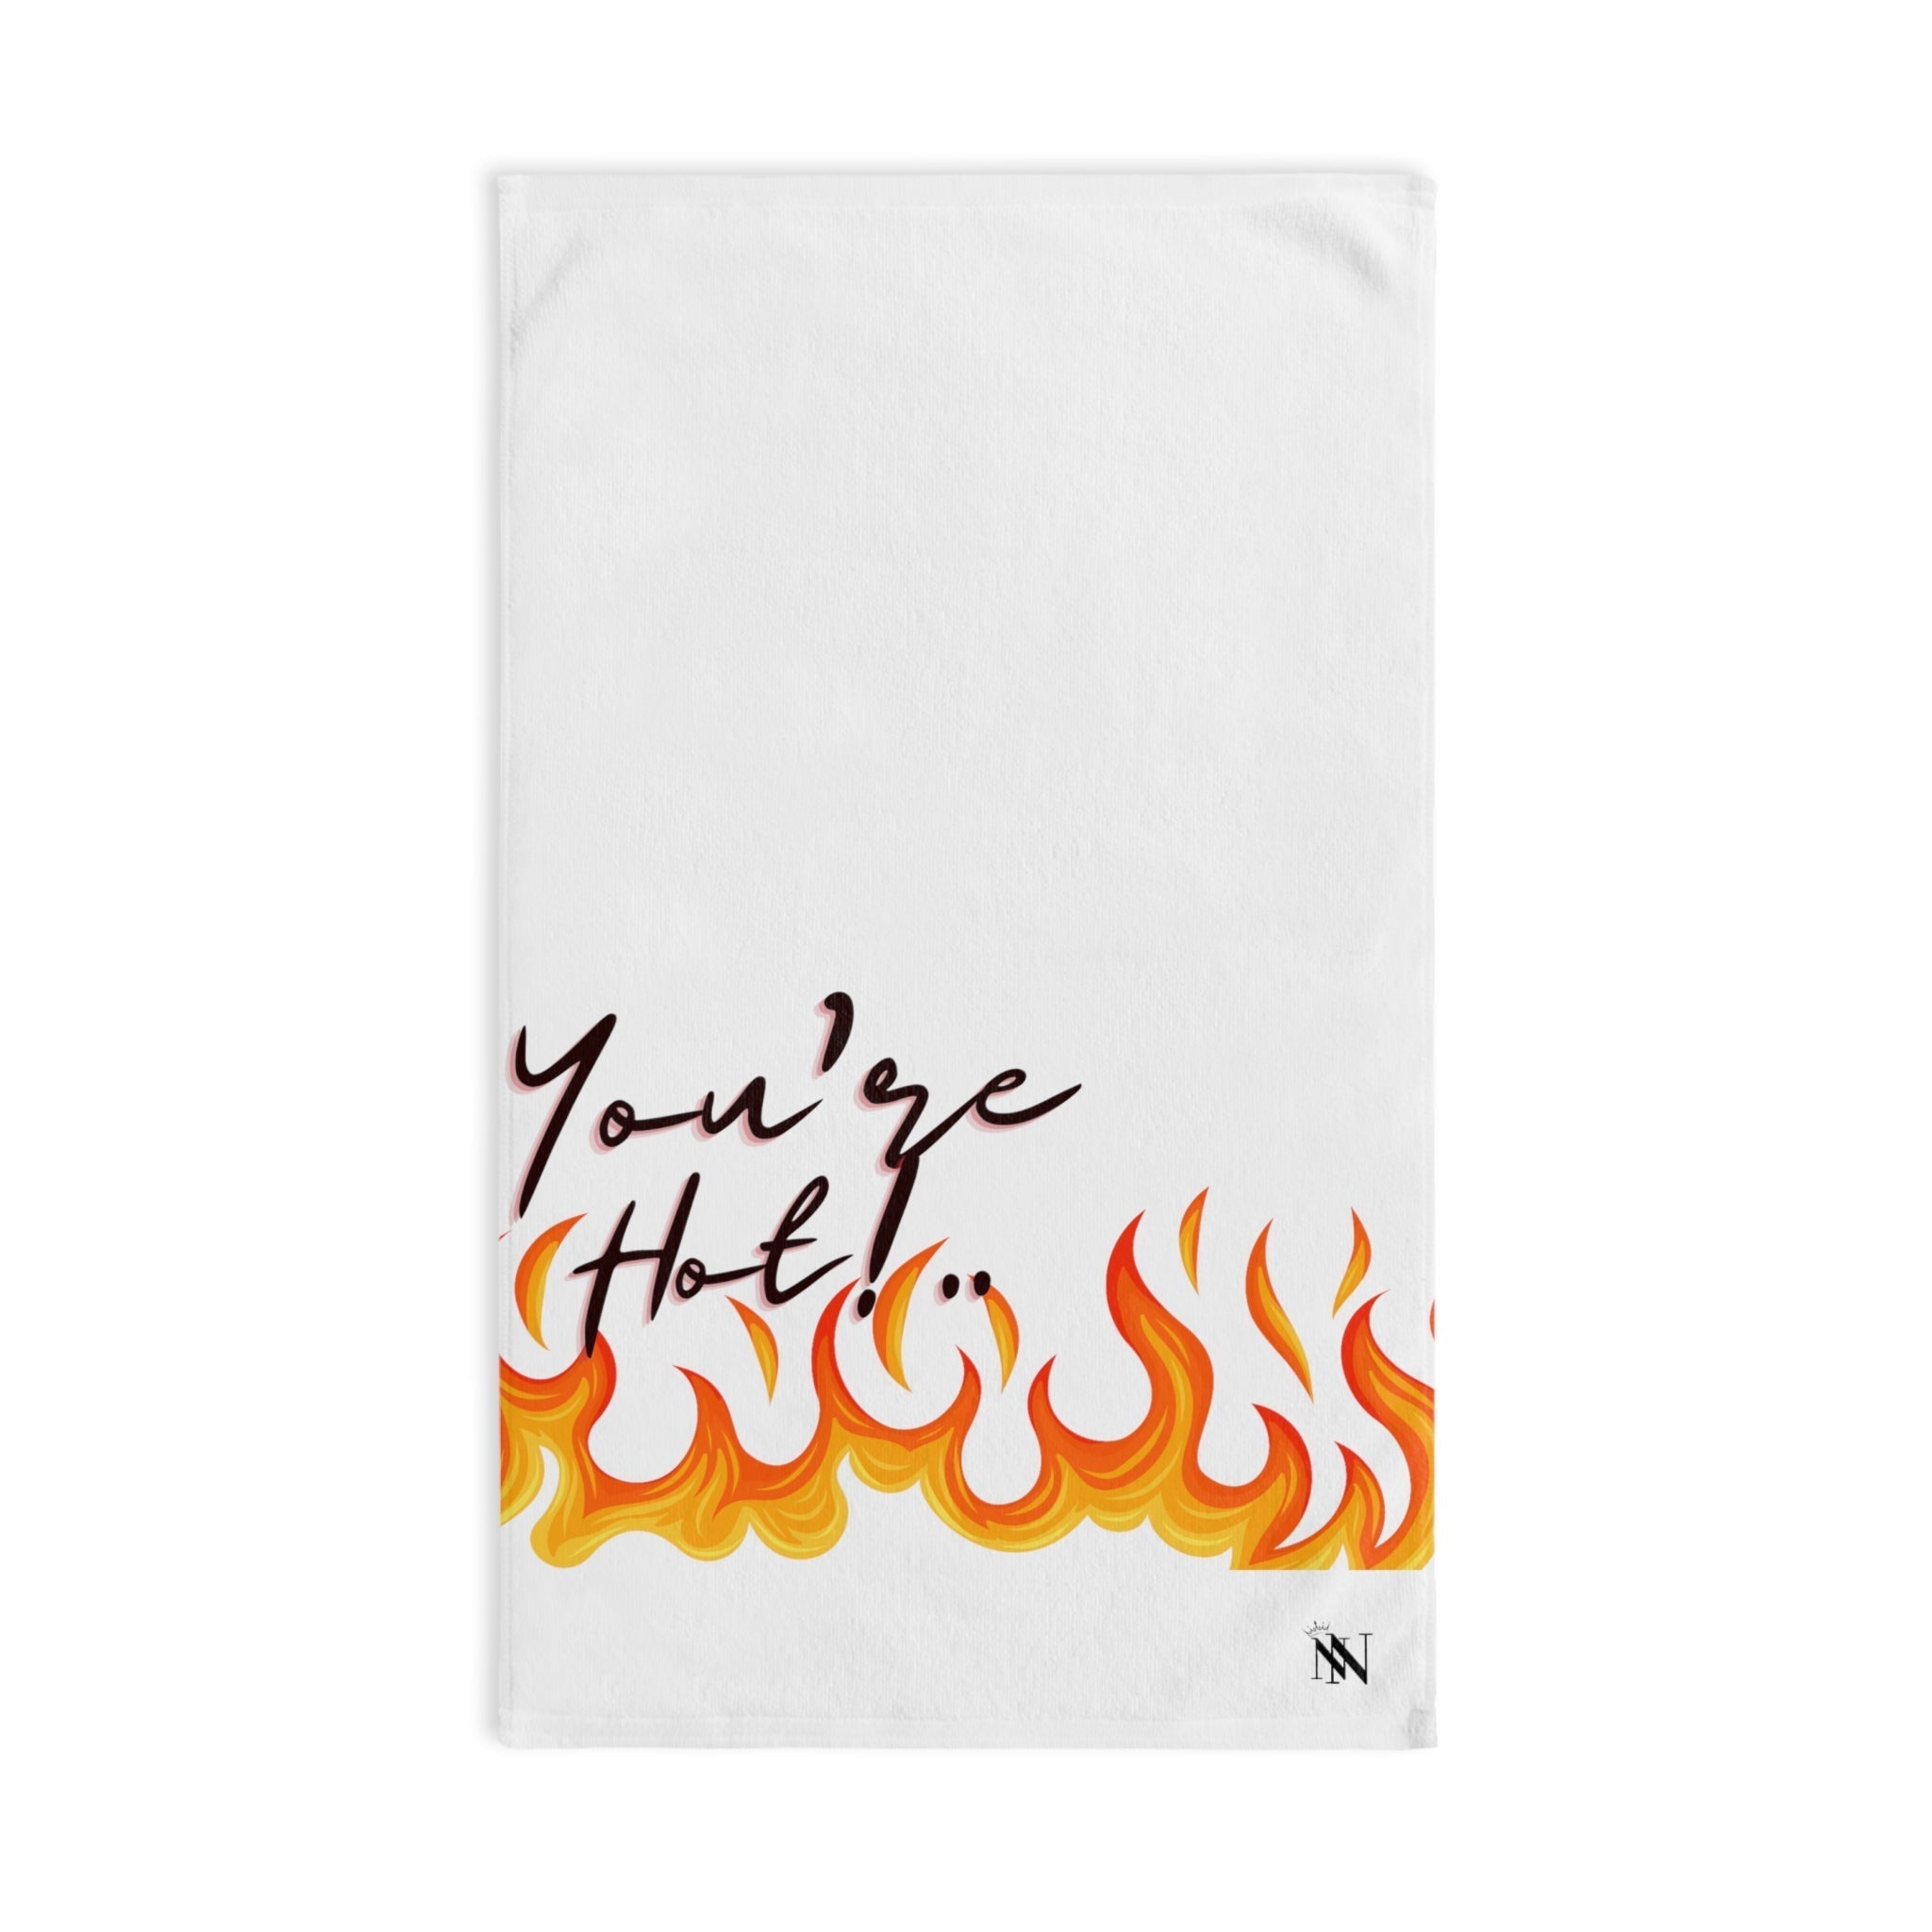 You're Hot Flames White | Funny Gifts for Men - Gifts for Him - Birthday Gifts for Men, Him, Her, Husband, Boyfriend, Girlfriend, New Couple Gifts, Fathers & Valentines Day Gifts, Christmas Gifts NECTAR NAPKINS